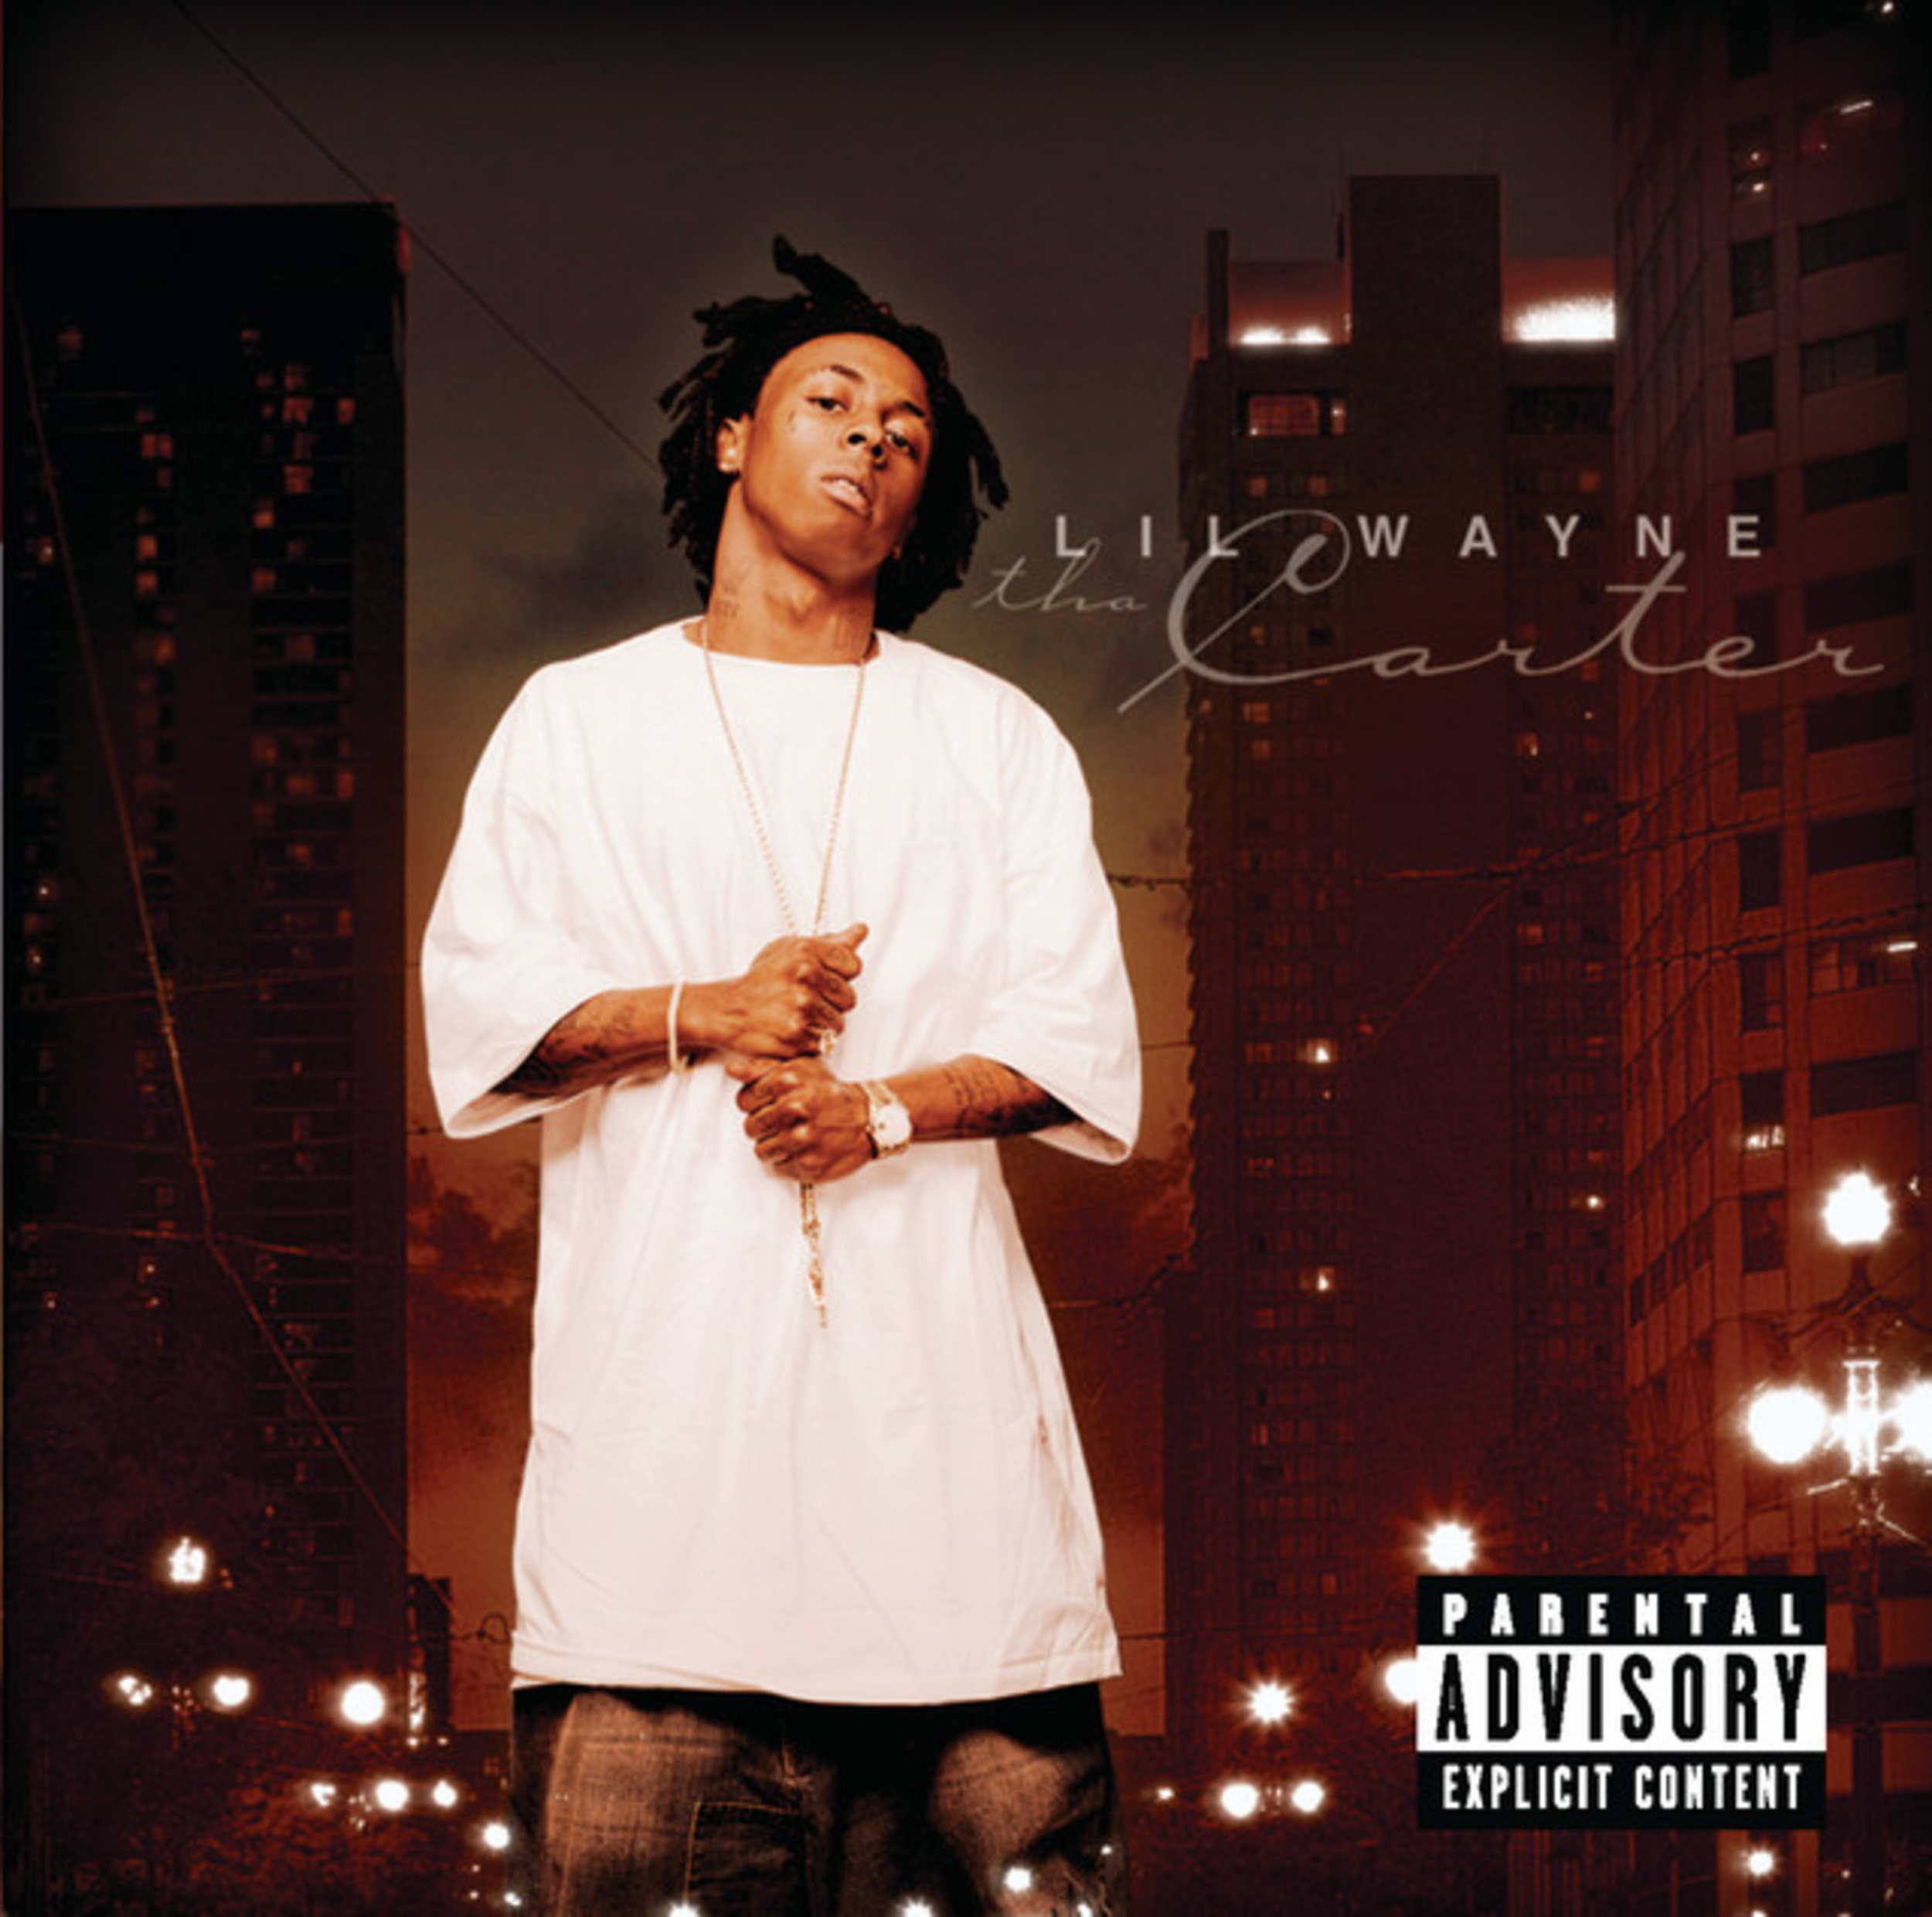 <p>Two years after releasing his third solo album, <em>500 Degreez</em>, Lil Wayne returned with his fourth project, <em>Tha Carter.</em> It was the beginning of his <em>Carter</em> series, named in reference to his surname. With production handled mostly by frequent collaborator Mannie Fresh, the album's top singles included "Bring It Back" and <a href="https://www.youtube.com/watch?v=MNS-Ho5tWo0">"Go DJ."</a> </p><p>You may also like: <a href='https://www.yardbarker.com/entertainment/articles/20_great_but_forgotten_movies_from_the_2000s/s1__39634157'>20 great but forgotten movies from the 2000s</a></p>